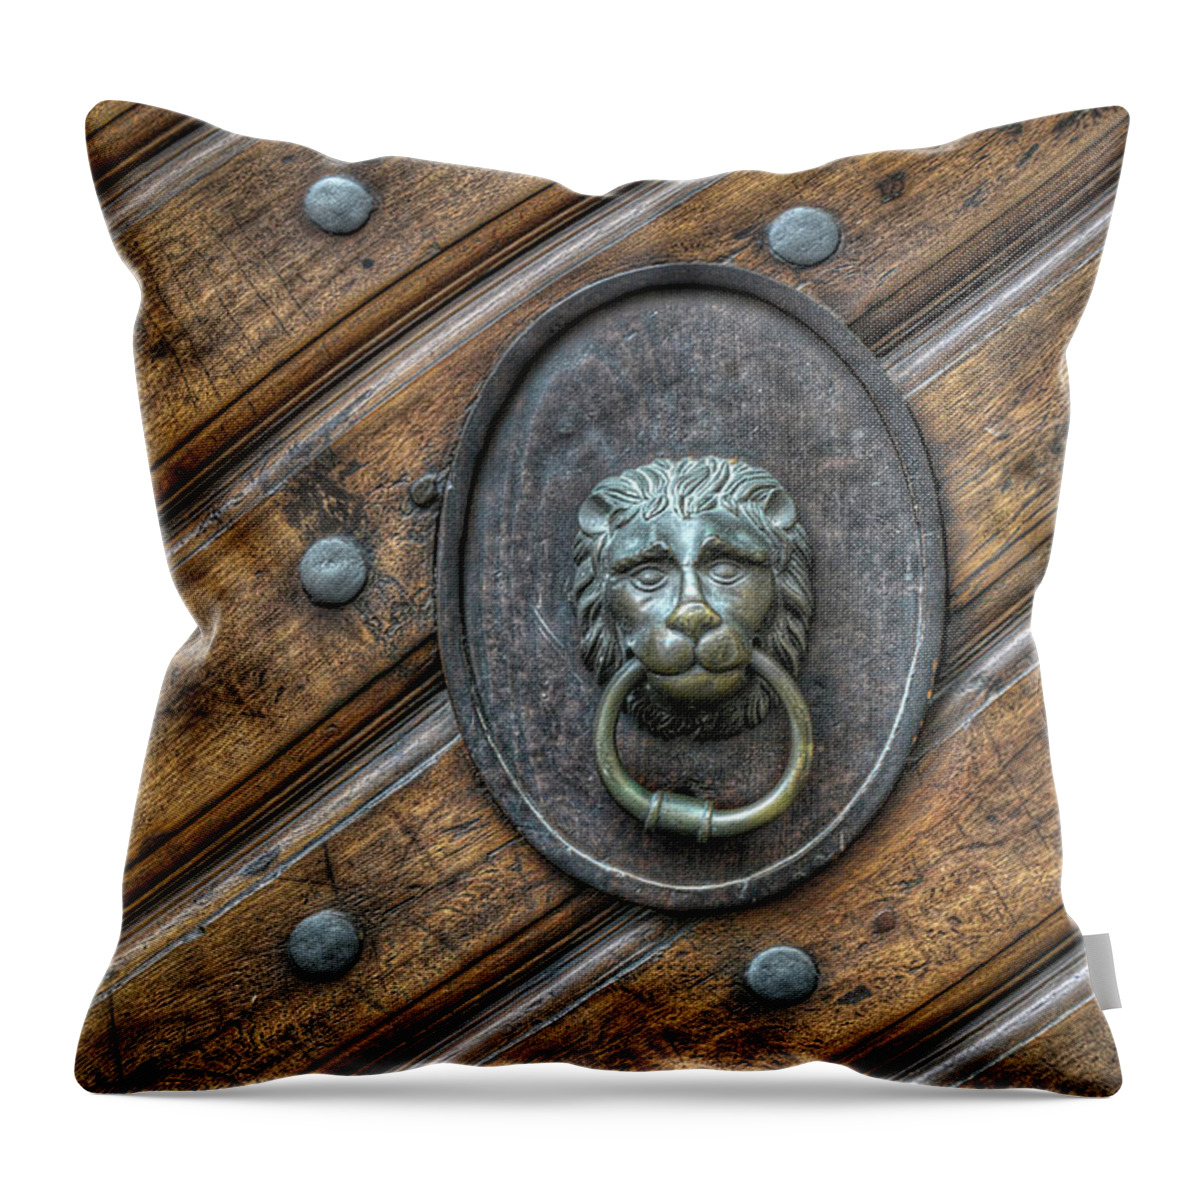  Throw Pillow featuring the photograph Lion Knocker by Michael Kirk